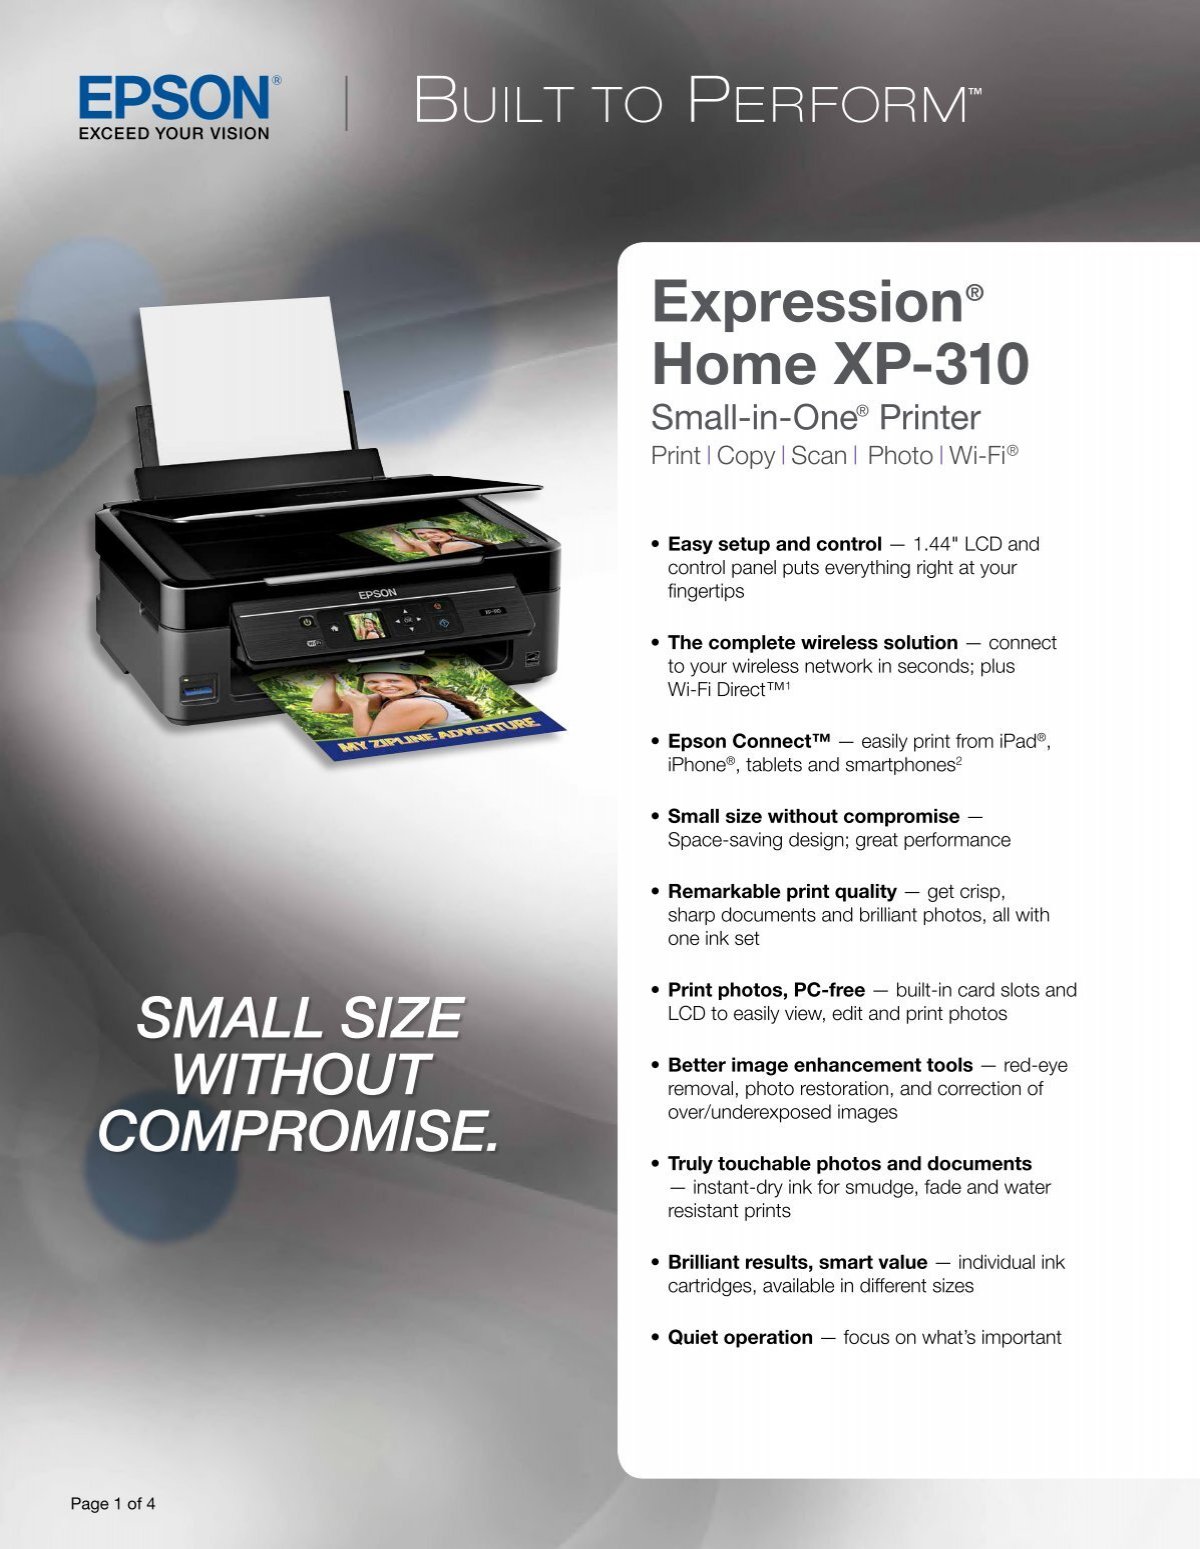 Epson Epson Expression Home Xp 310 Small In One® All In One Printer Product Specifications 7460